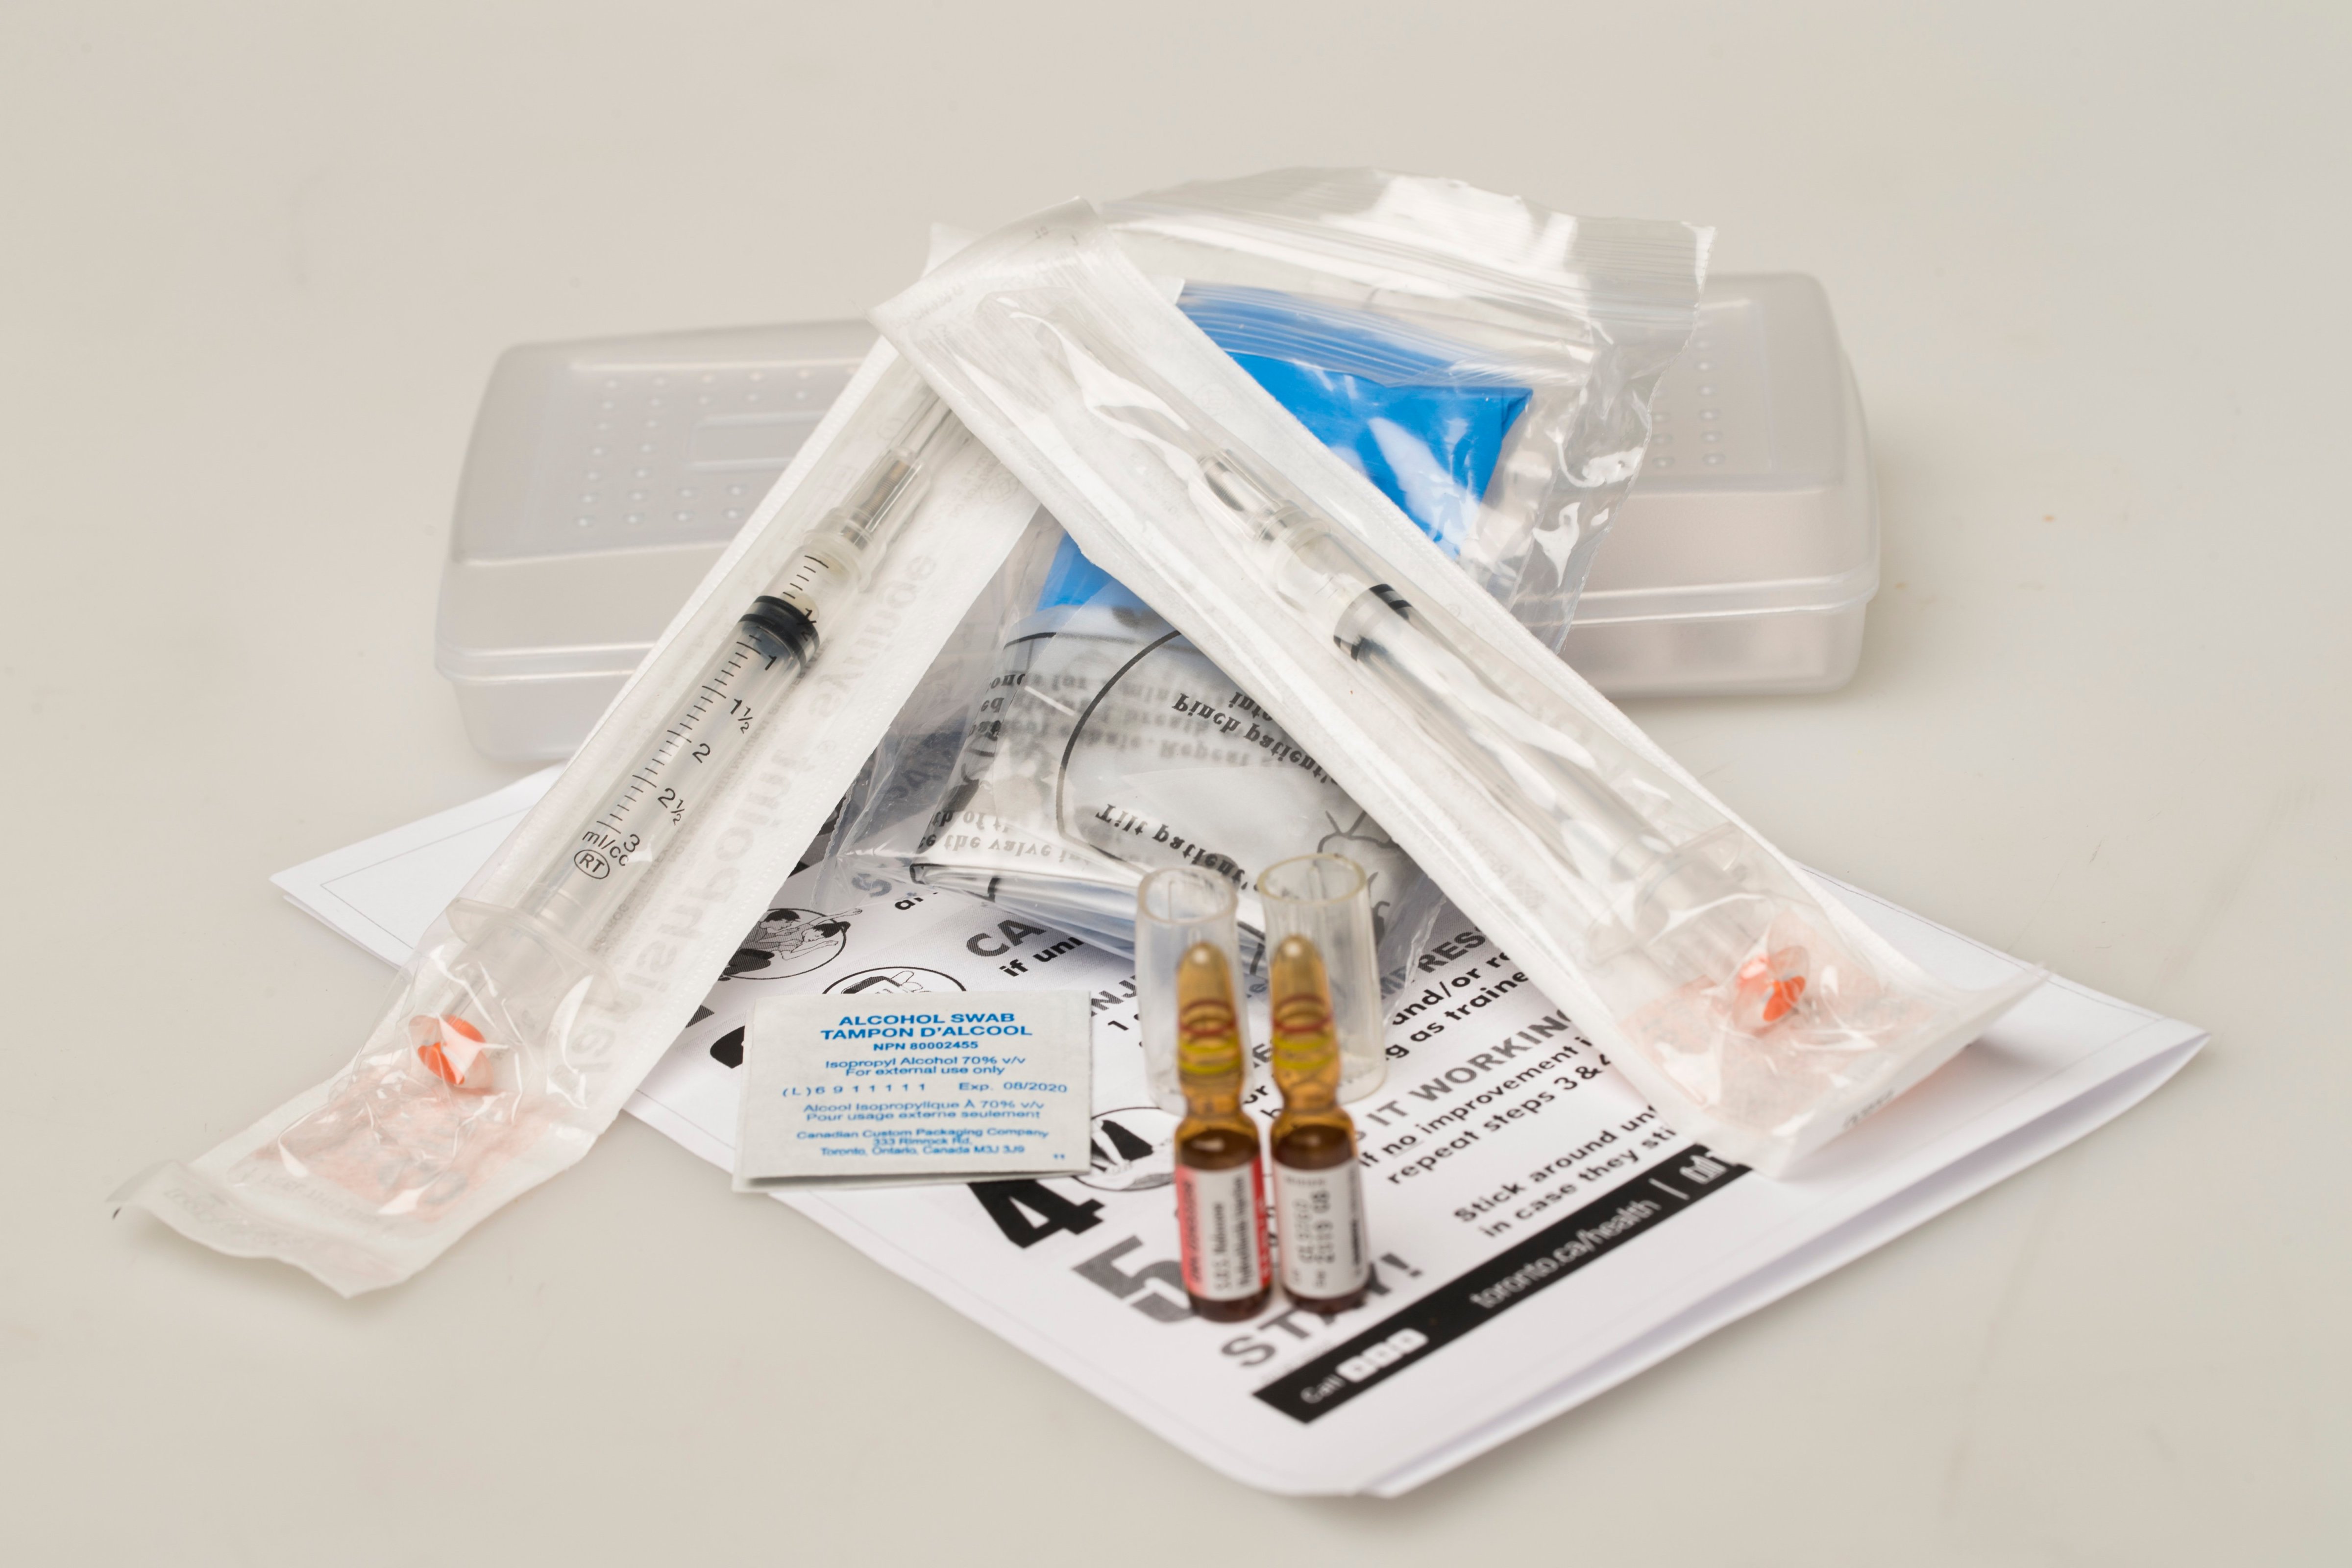 Naloxone kit, as purchased over the counter. (Rick Madonik—Toronto Star via Getty Images)